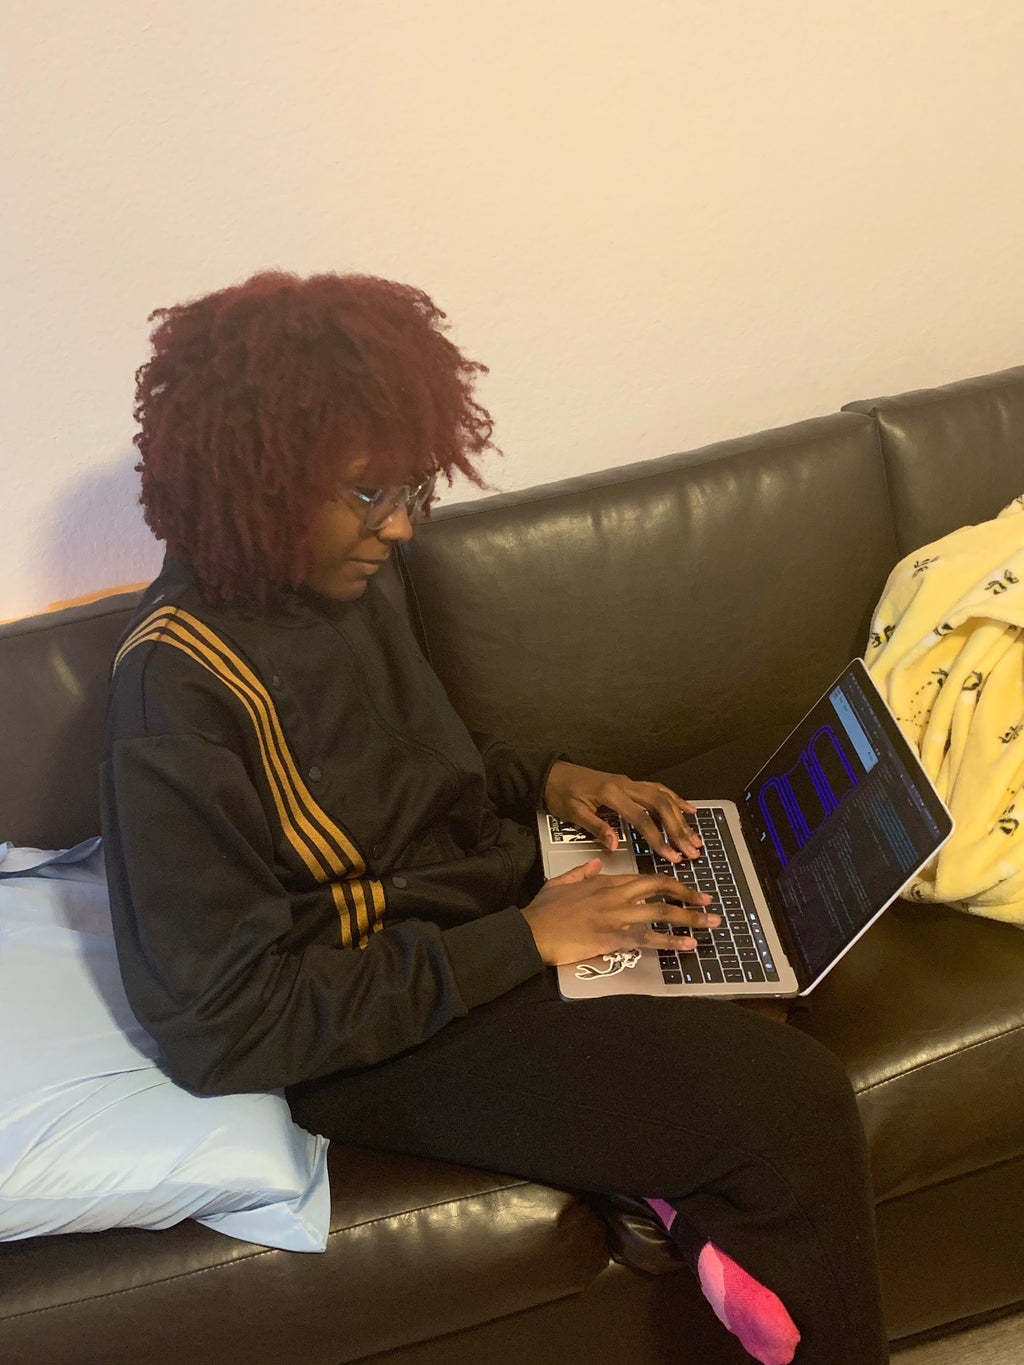 Chance Onyiorah sitting on a sofa and working on her laptop.